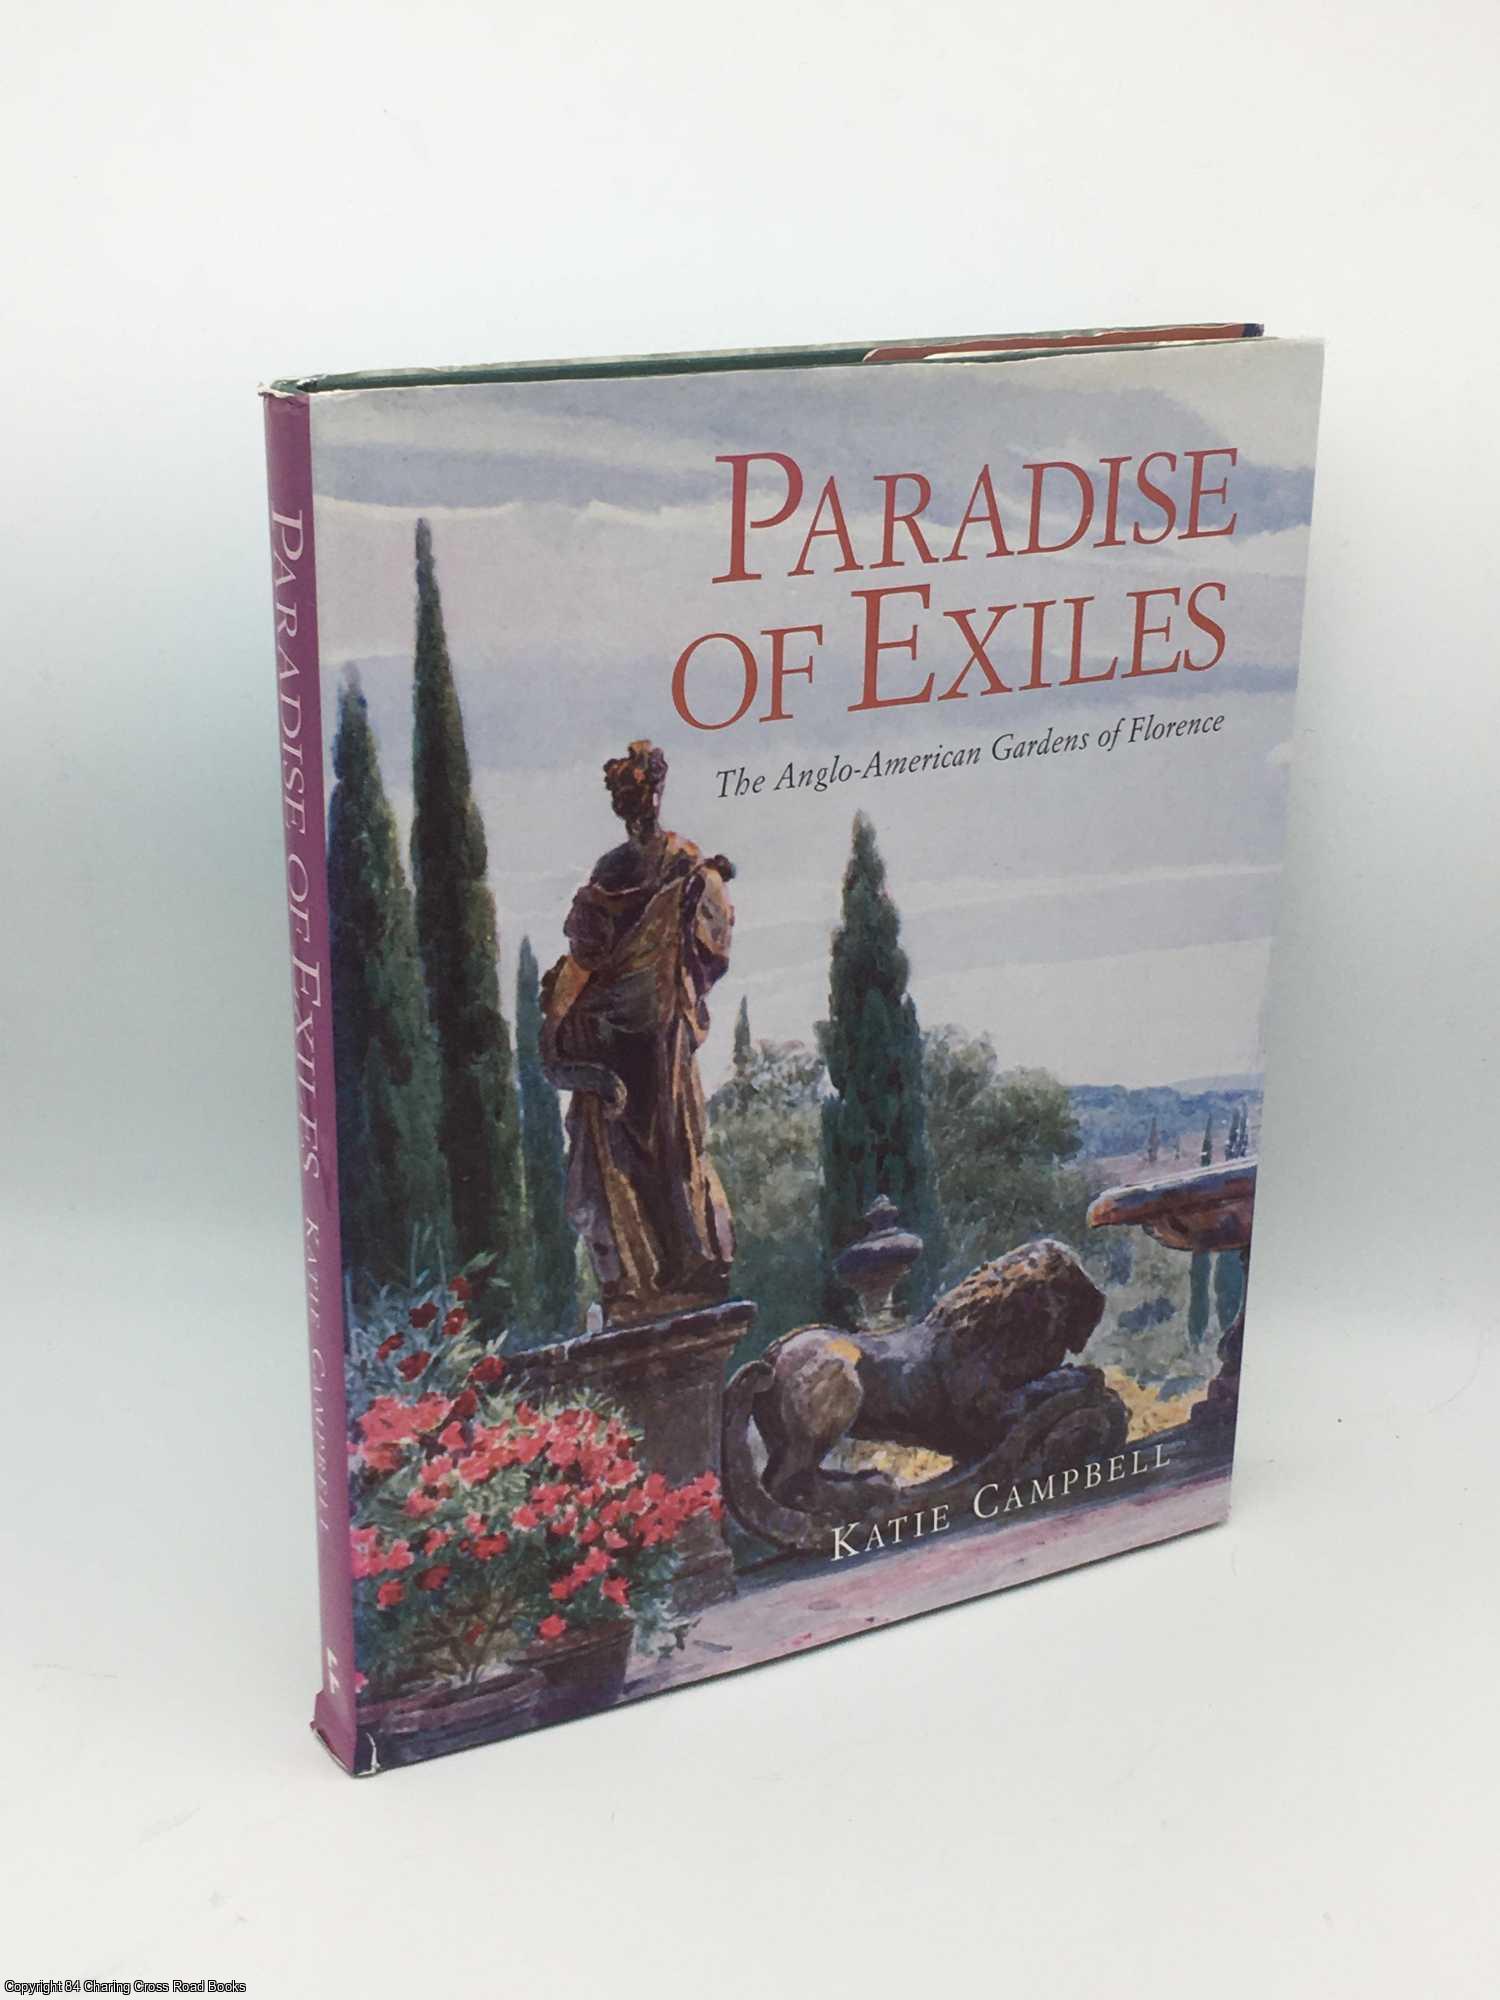 Campbell, Katie - Paradise of Exiles